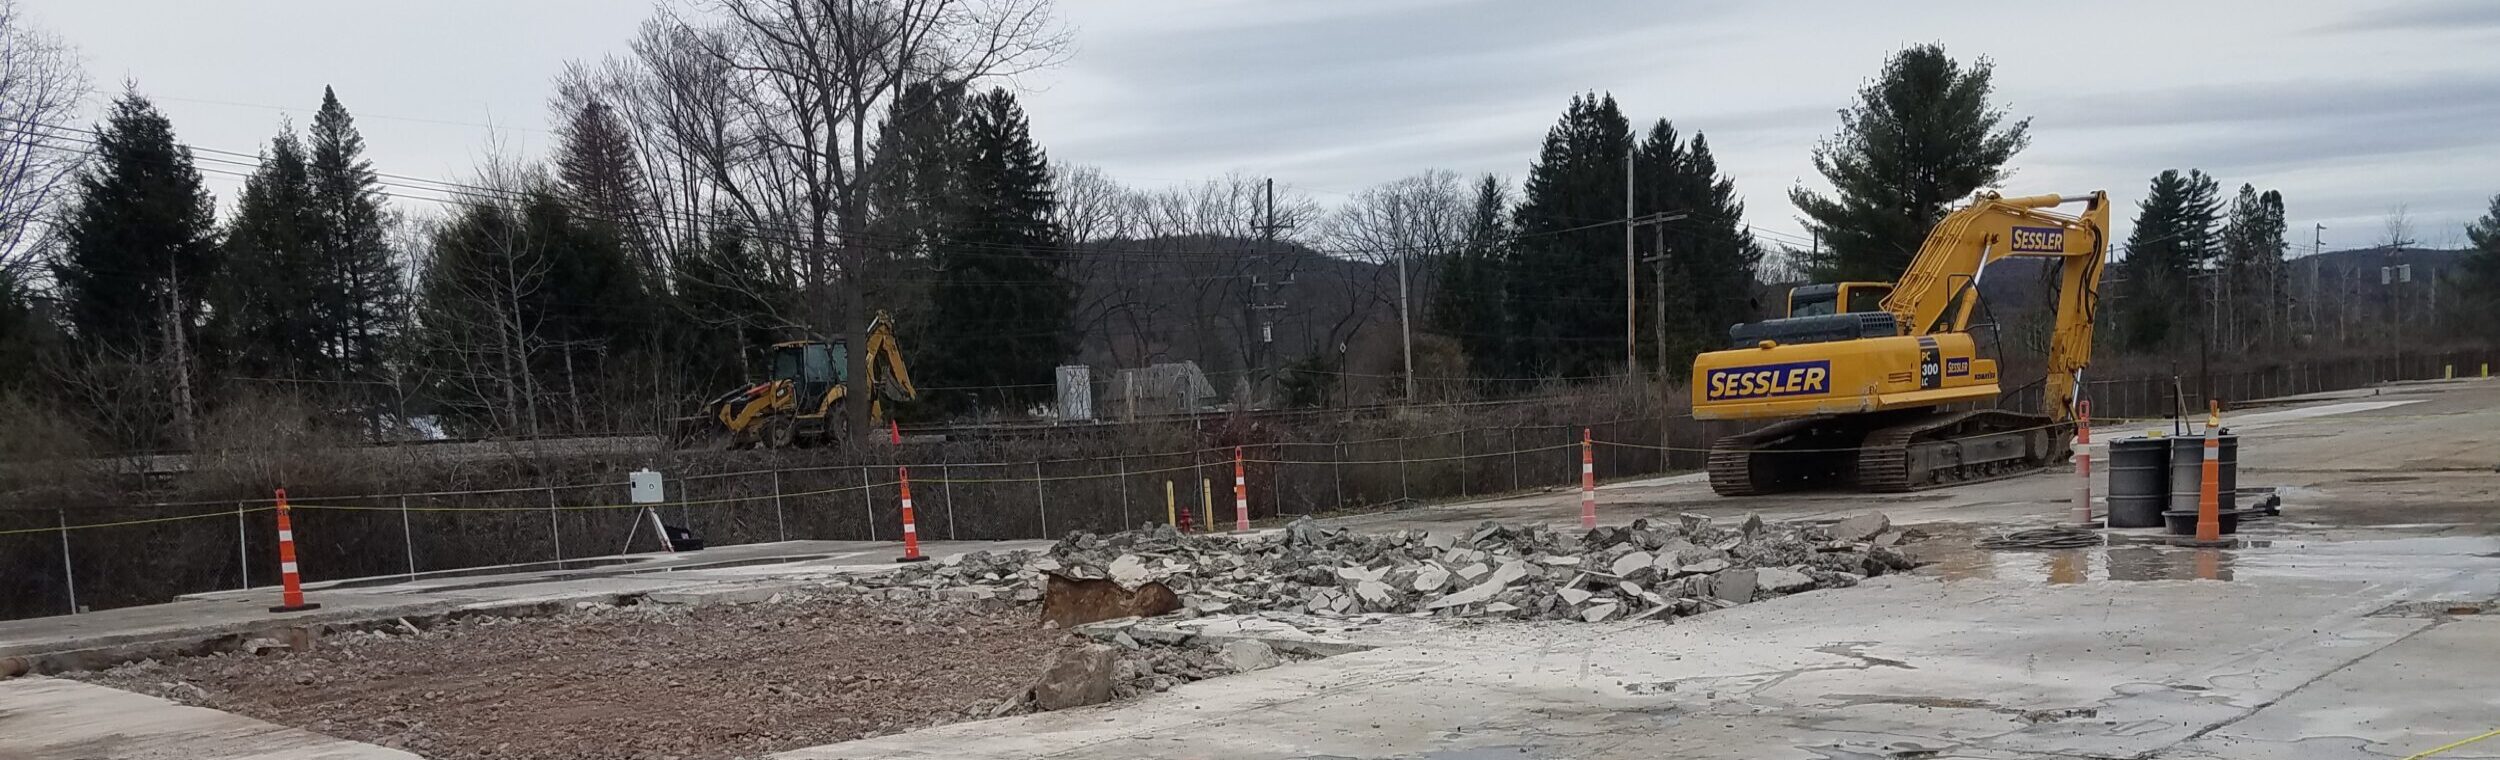 Remediation Of Pcb Impacted Soils Central New York 4